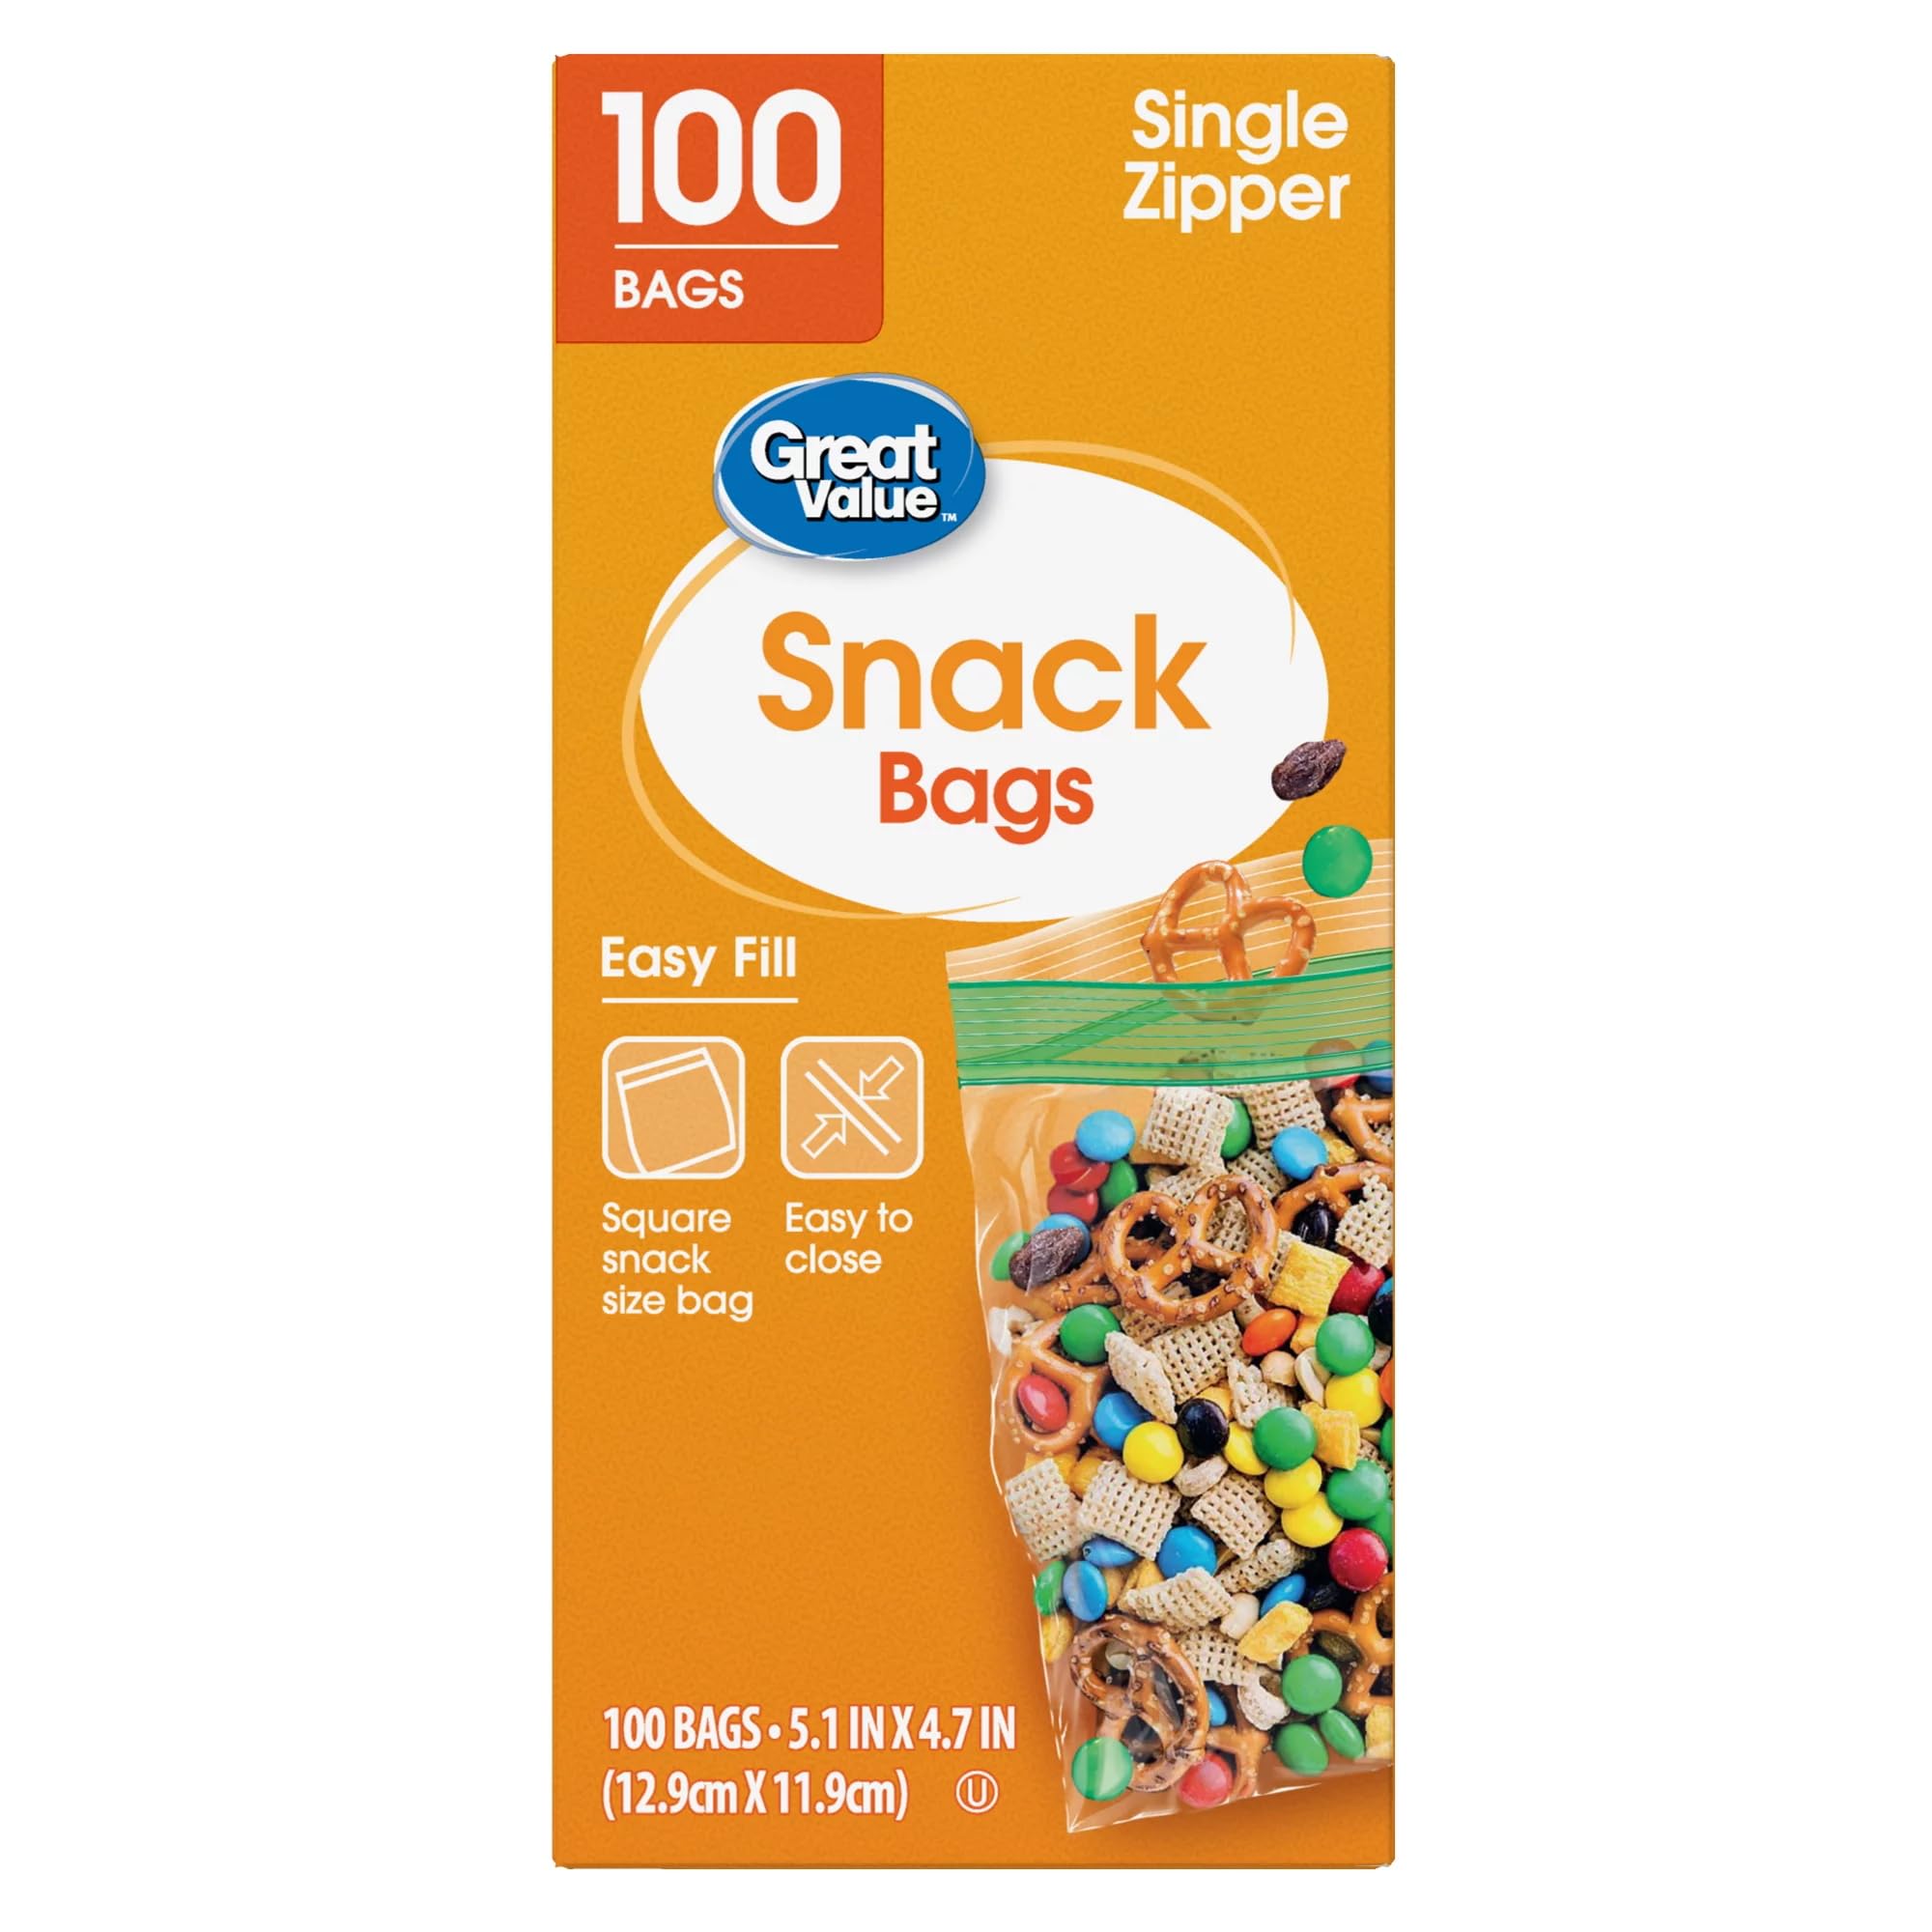 Great Value Bags Zipper Square Snack 100pk